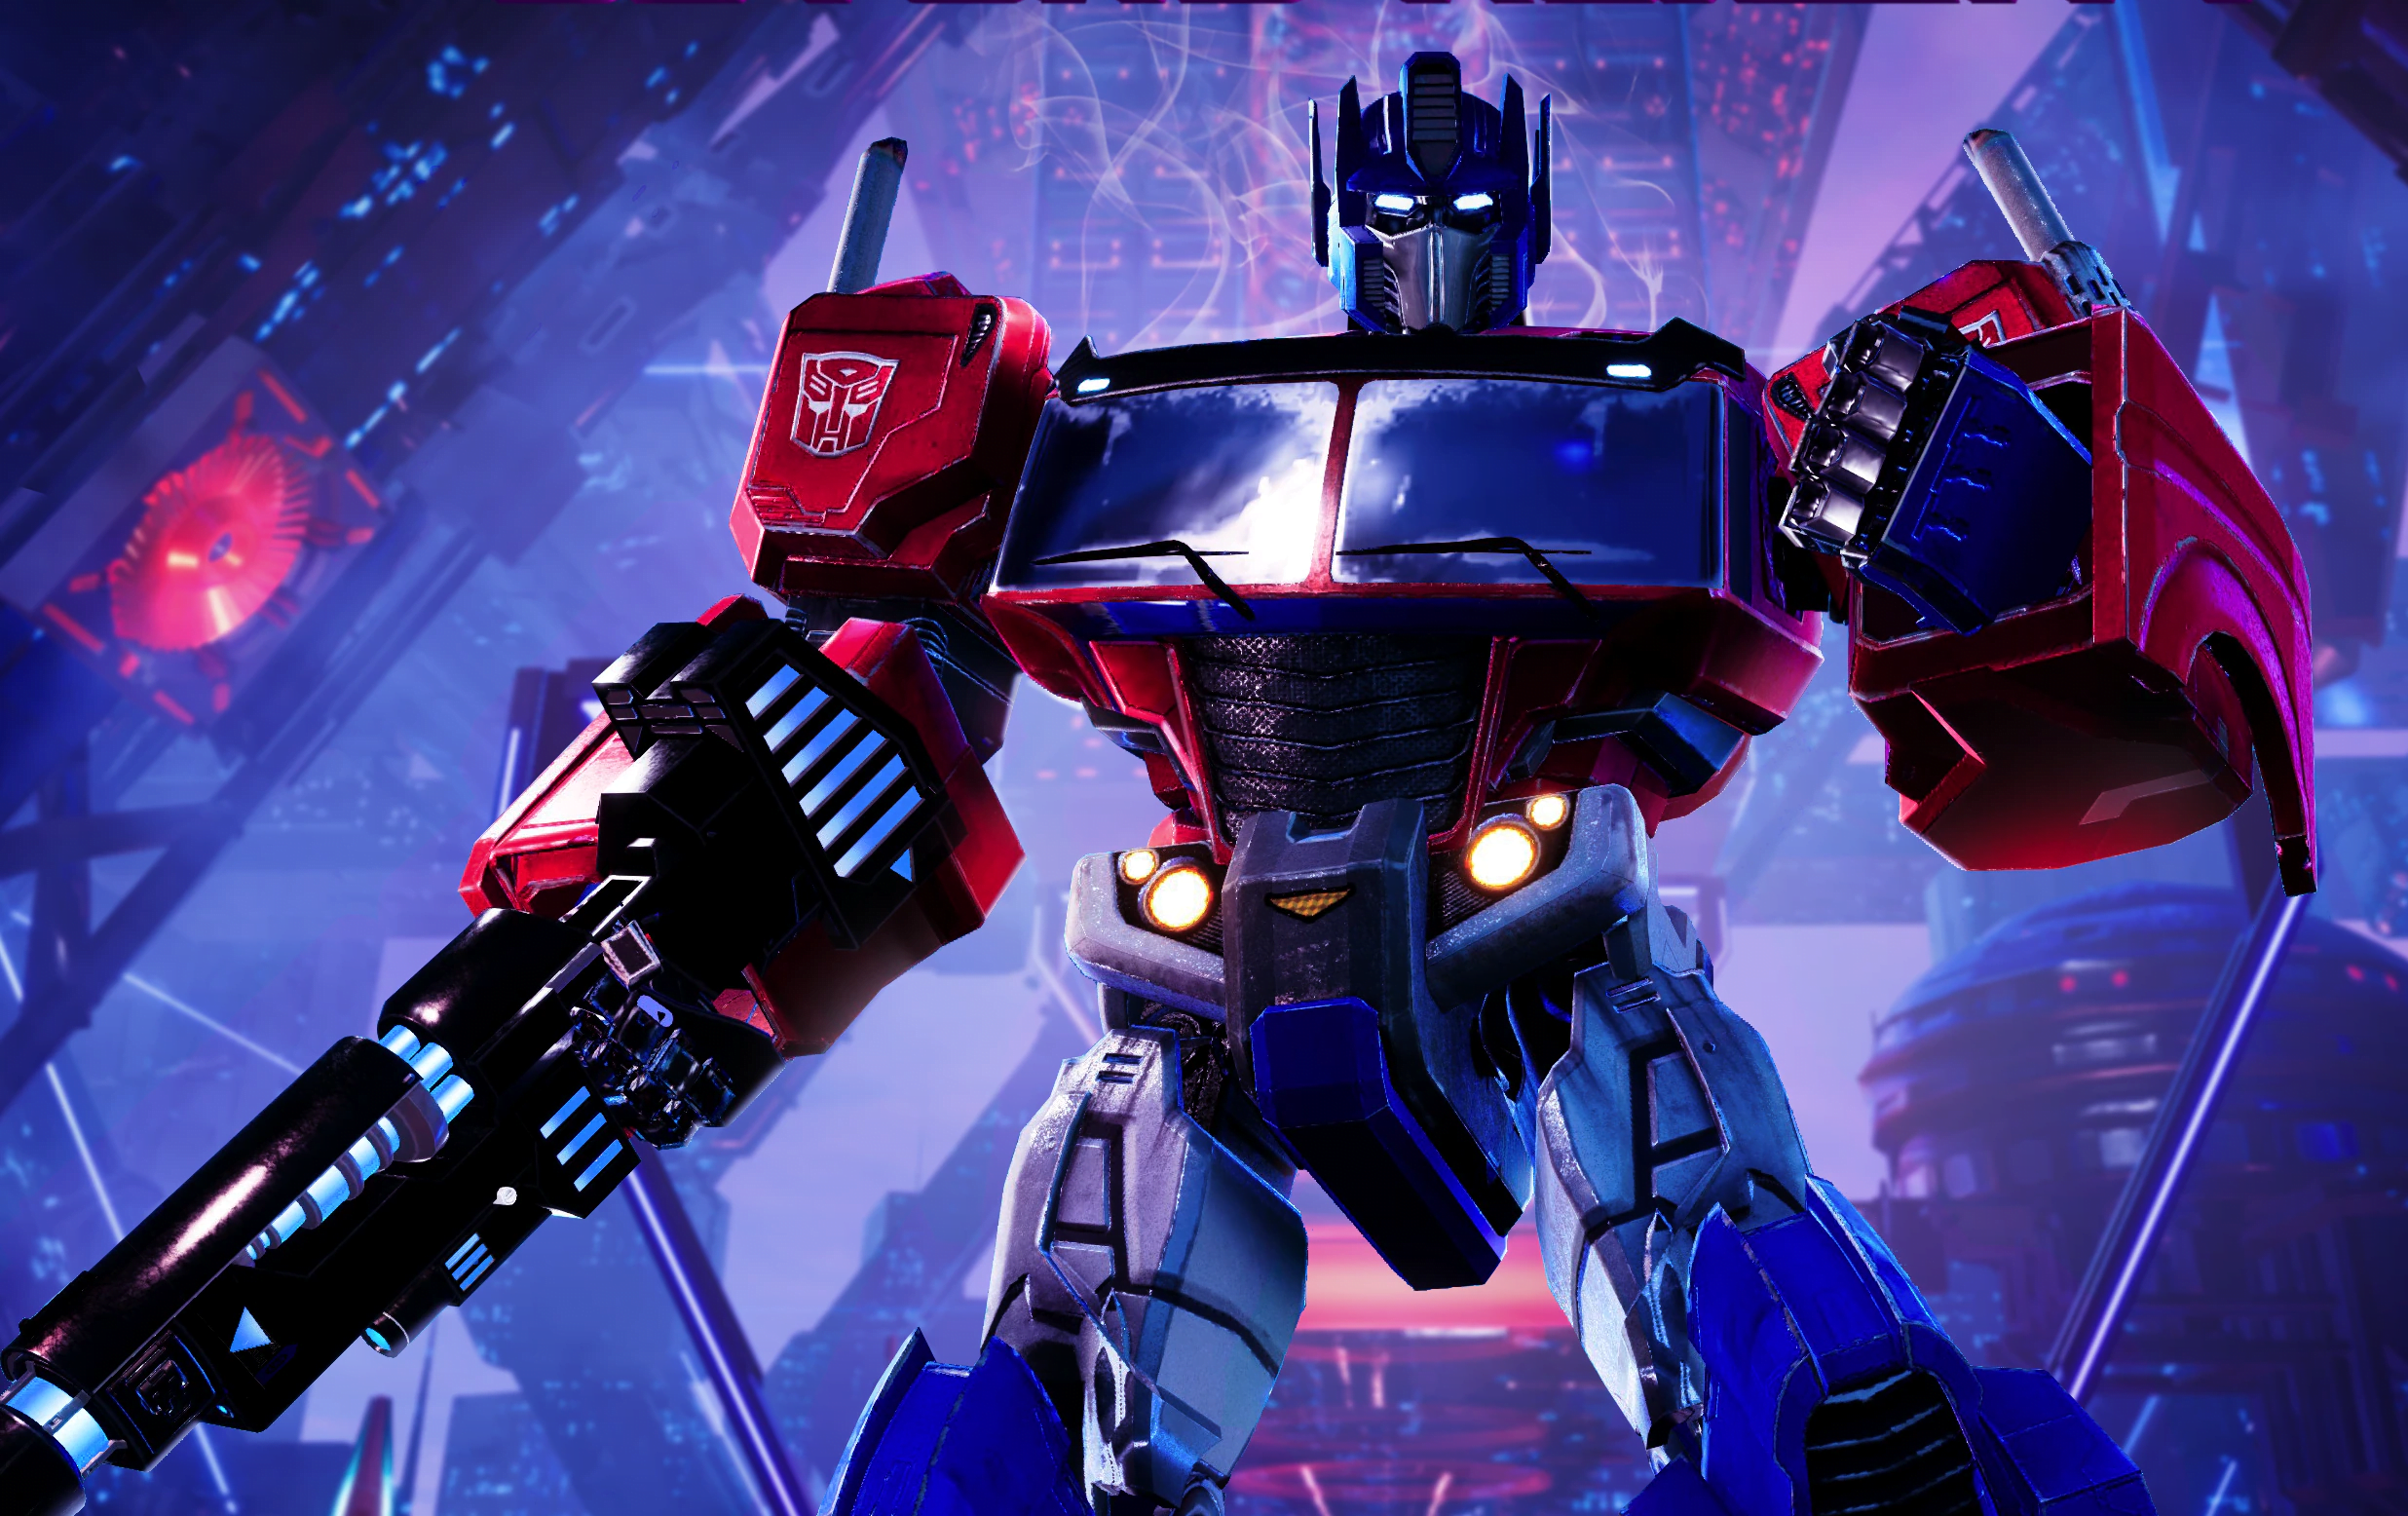 Transformers Beyond Reality for PSVR: Side by side with giants